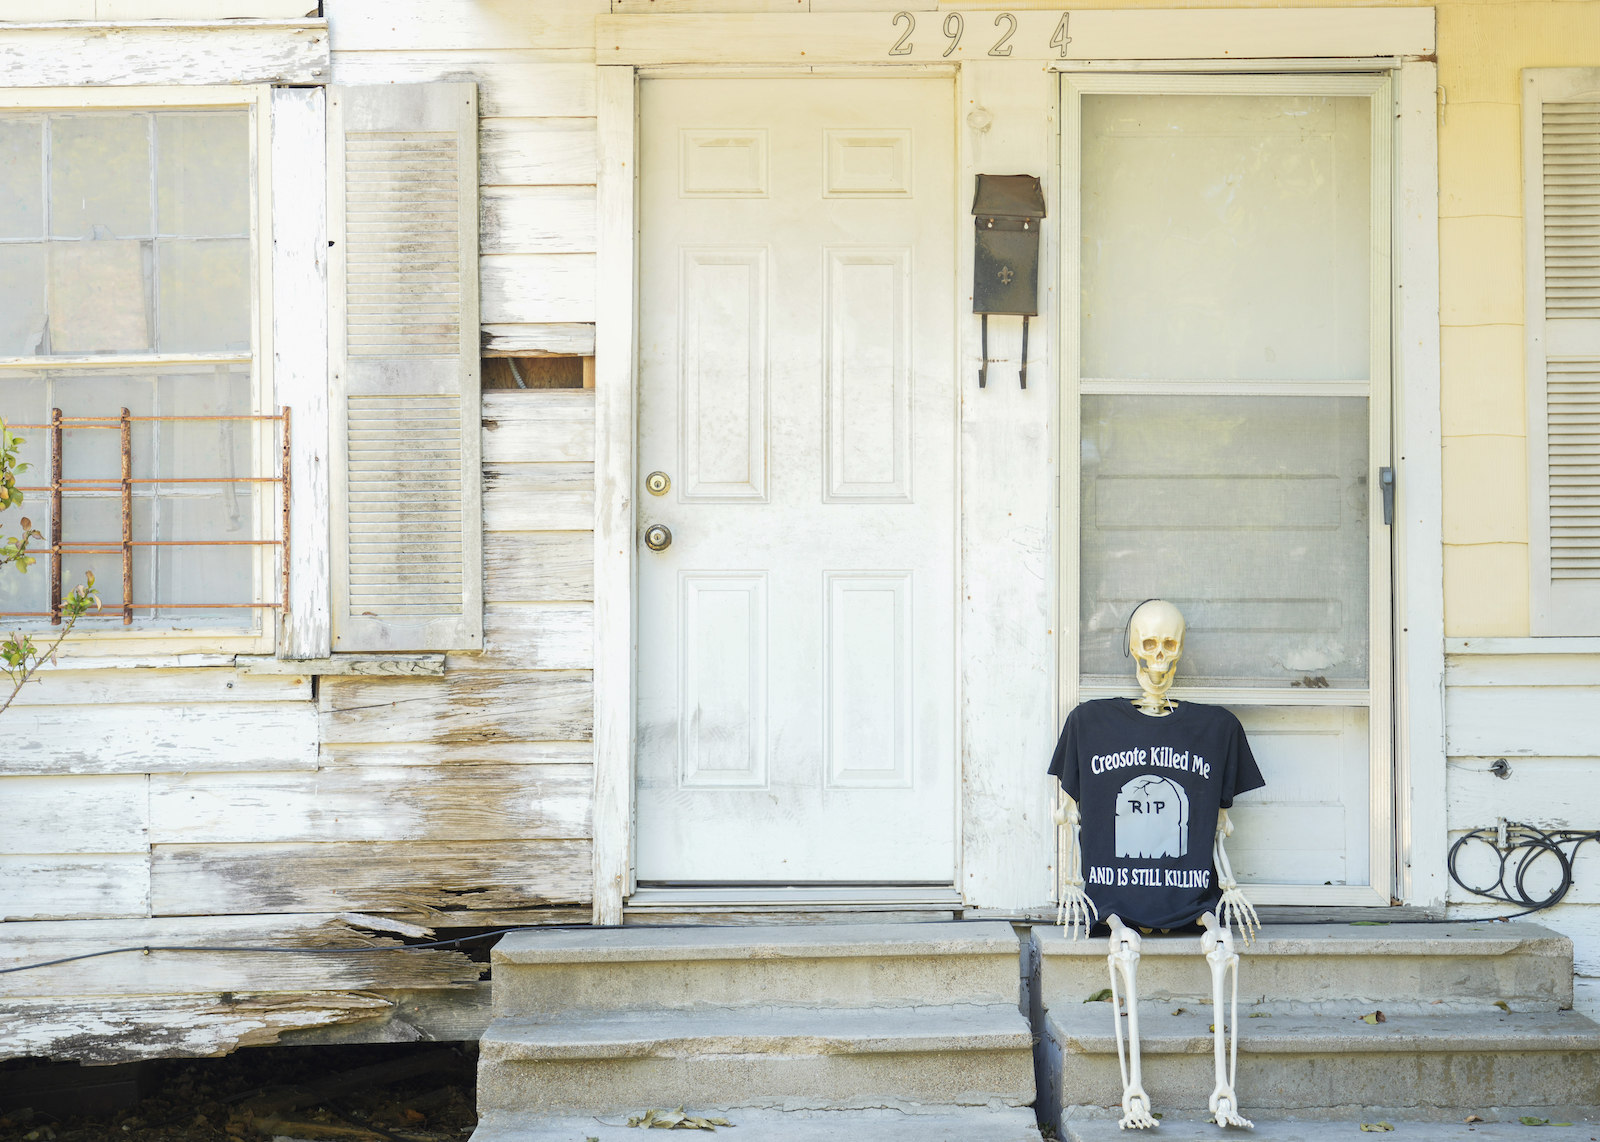 A plastic skeleton wearing a black t-shirt with "creosote killed me" on it sits on a porch